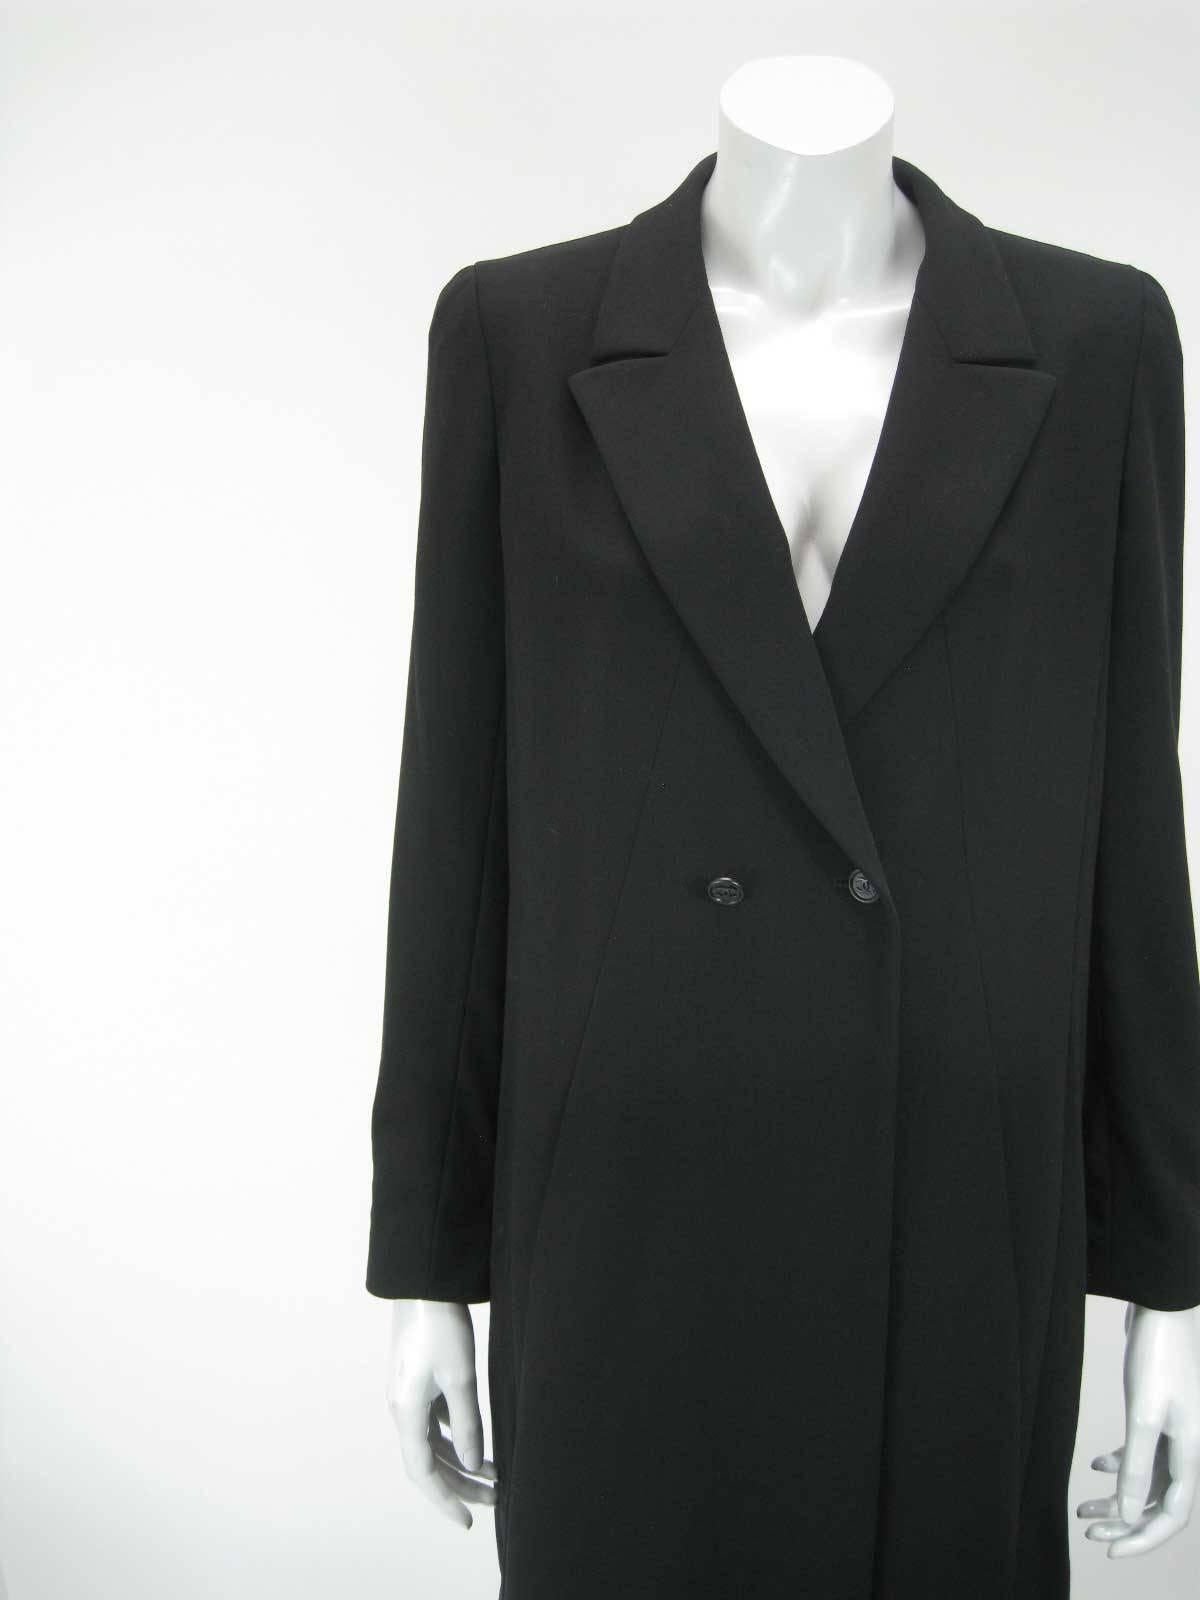 Women's Chanel Boutique Black Long Double Breasted Evening Jacket.